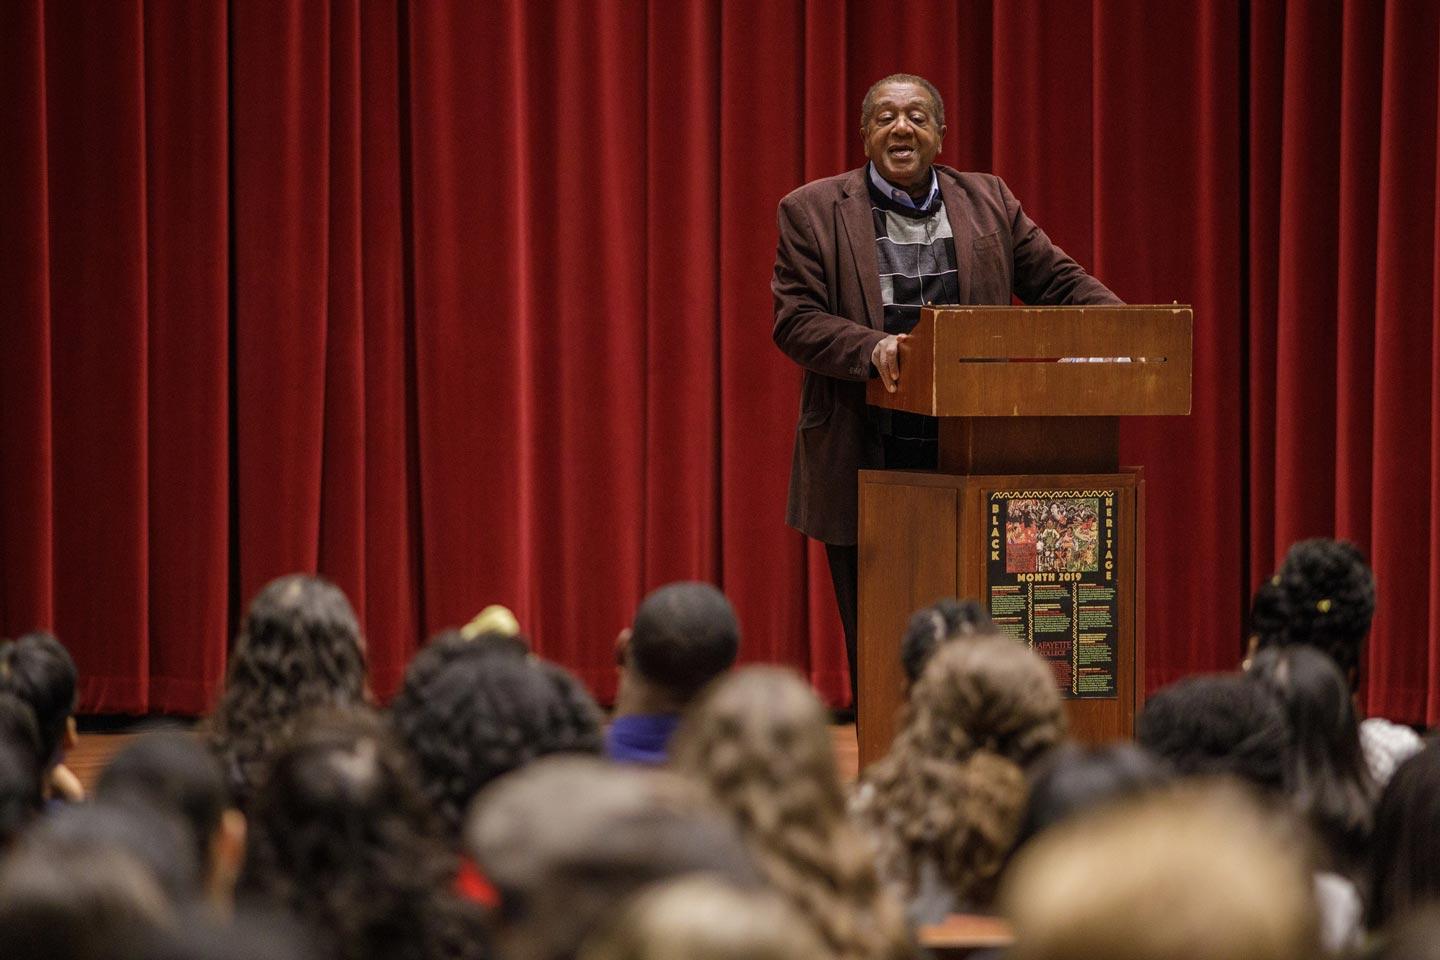 Bobby Seale, co-founder and national chairman of the Black Panther Party, addresses a crowd in Colton Chapel Feb. 12 as Lafayette’s Black History Month keynote speaker.